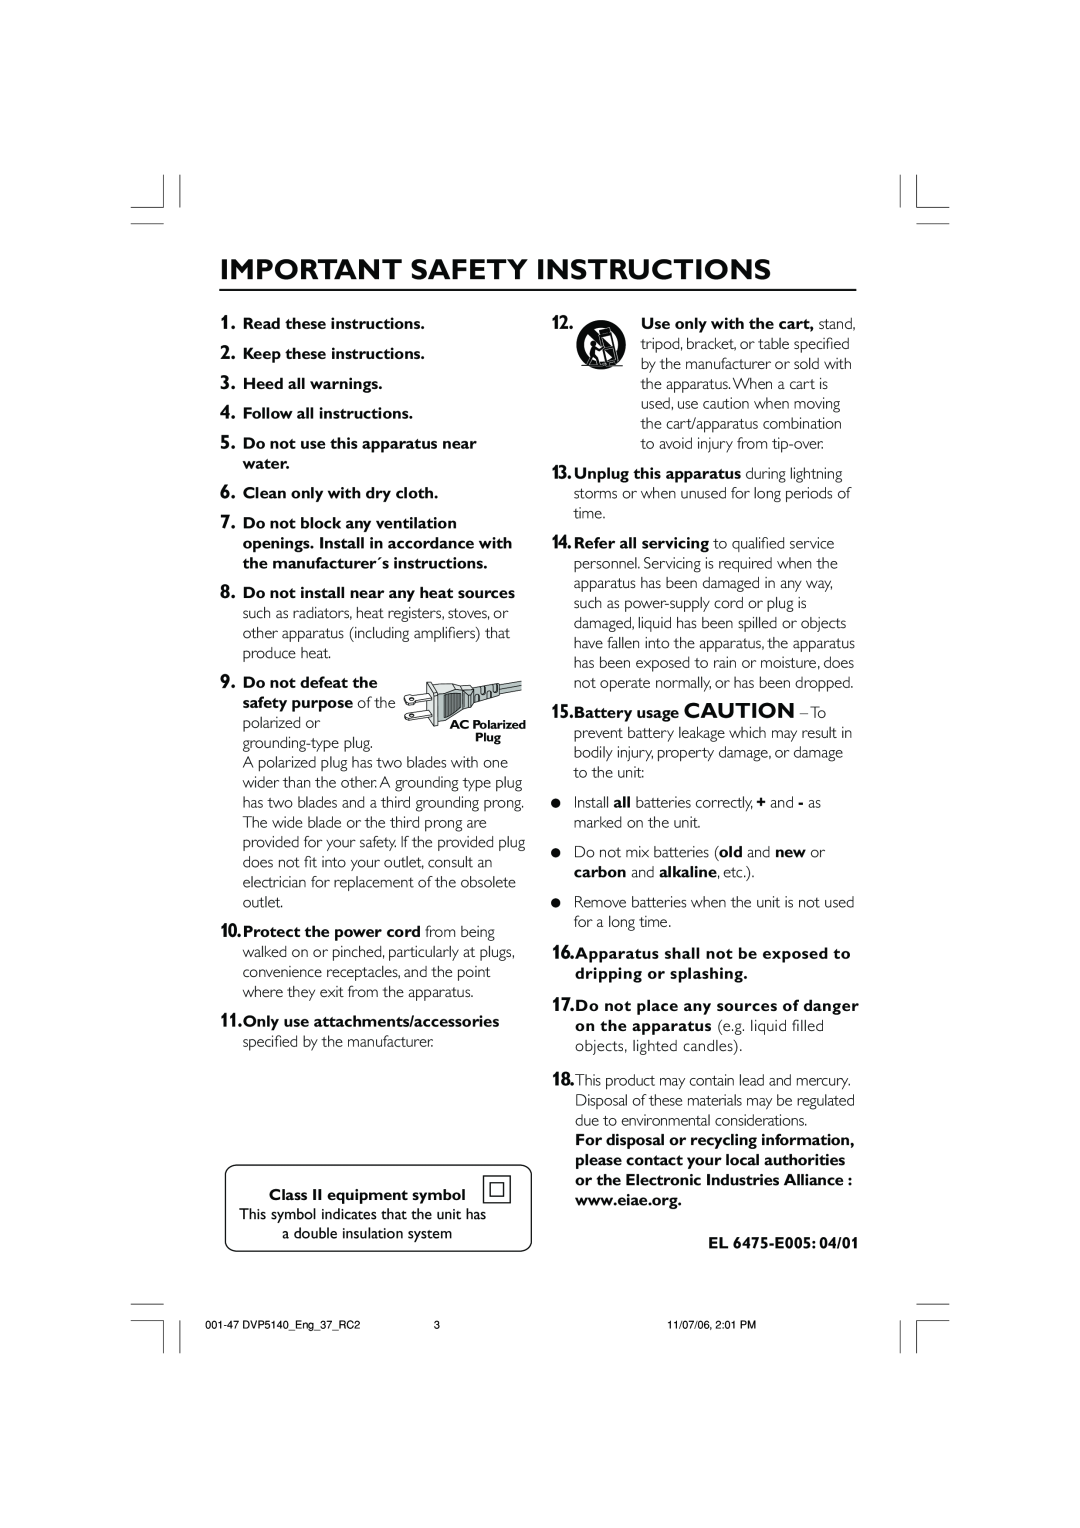 Philips DVP5140 Important Safety Instructions, Read these instructions 2. Keep these instructions, EL 6475-E005 04/01 